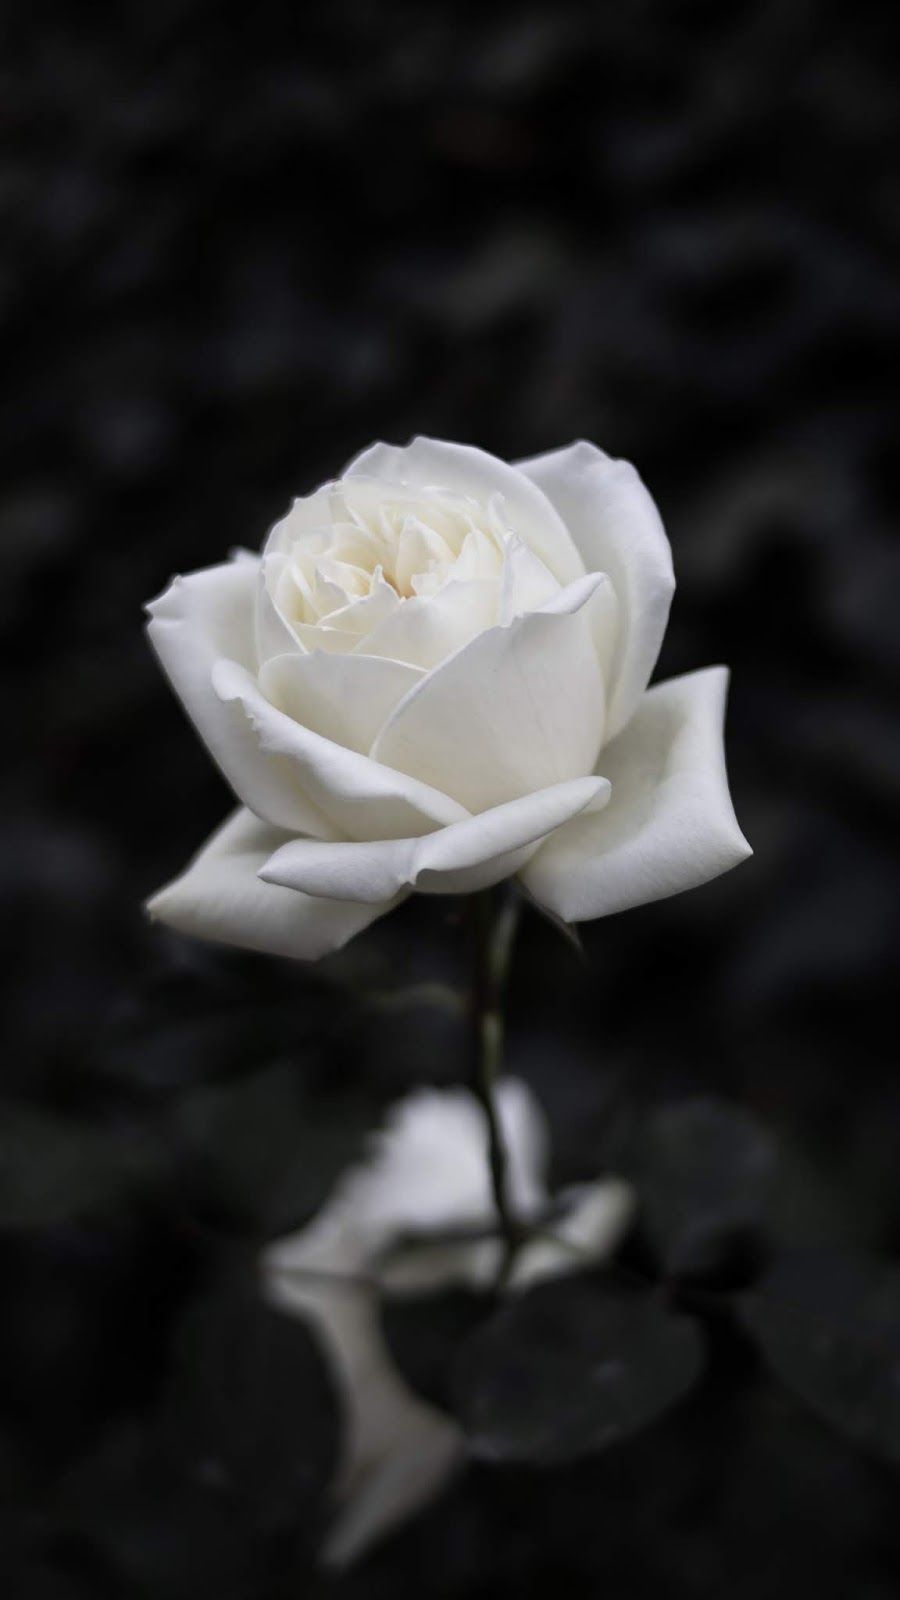 White rose #wallpaper #iphone #android #background #followme. Rose flower wallpaper, Dark background wallpaper, Rose wallpaper